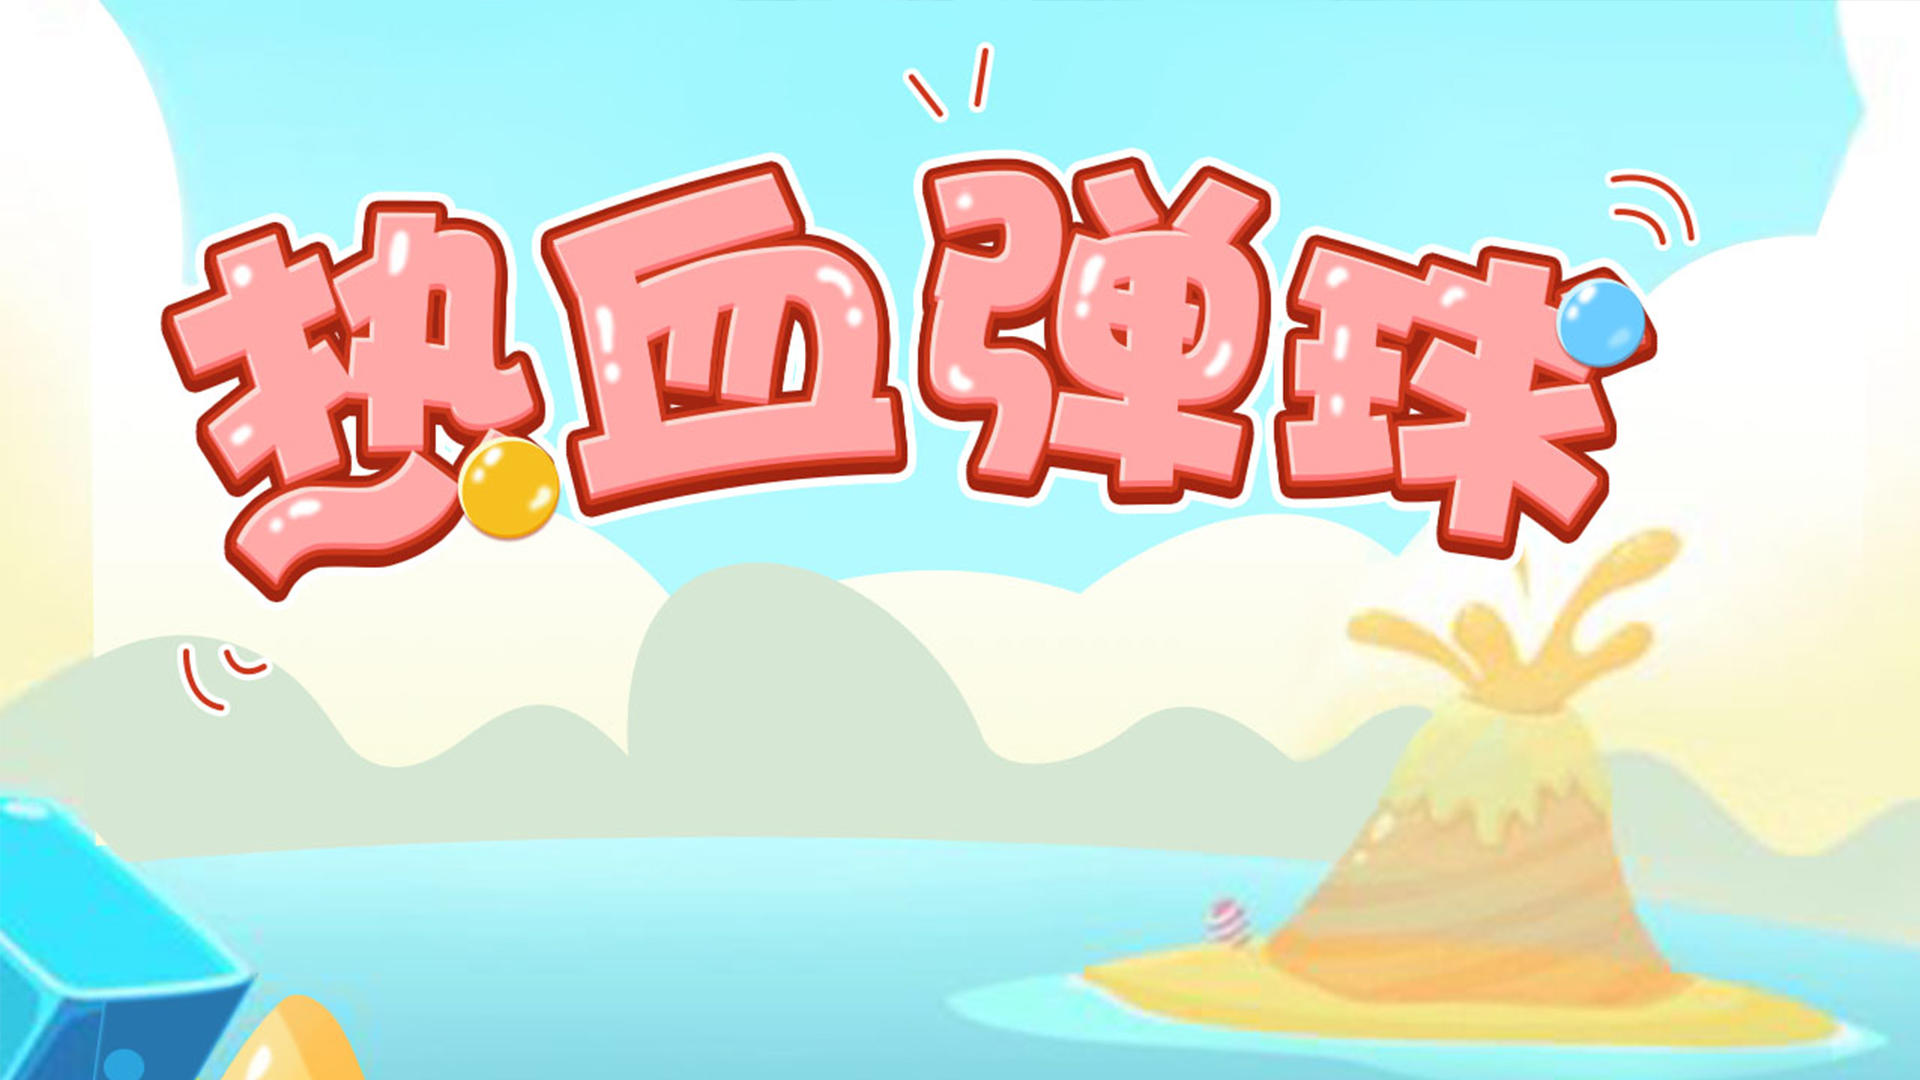 Banner of 熱血彈球 